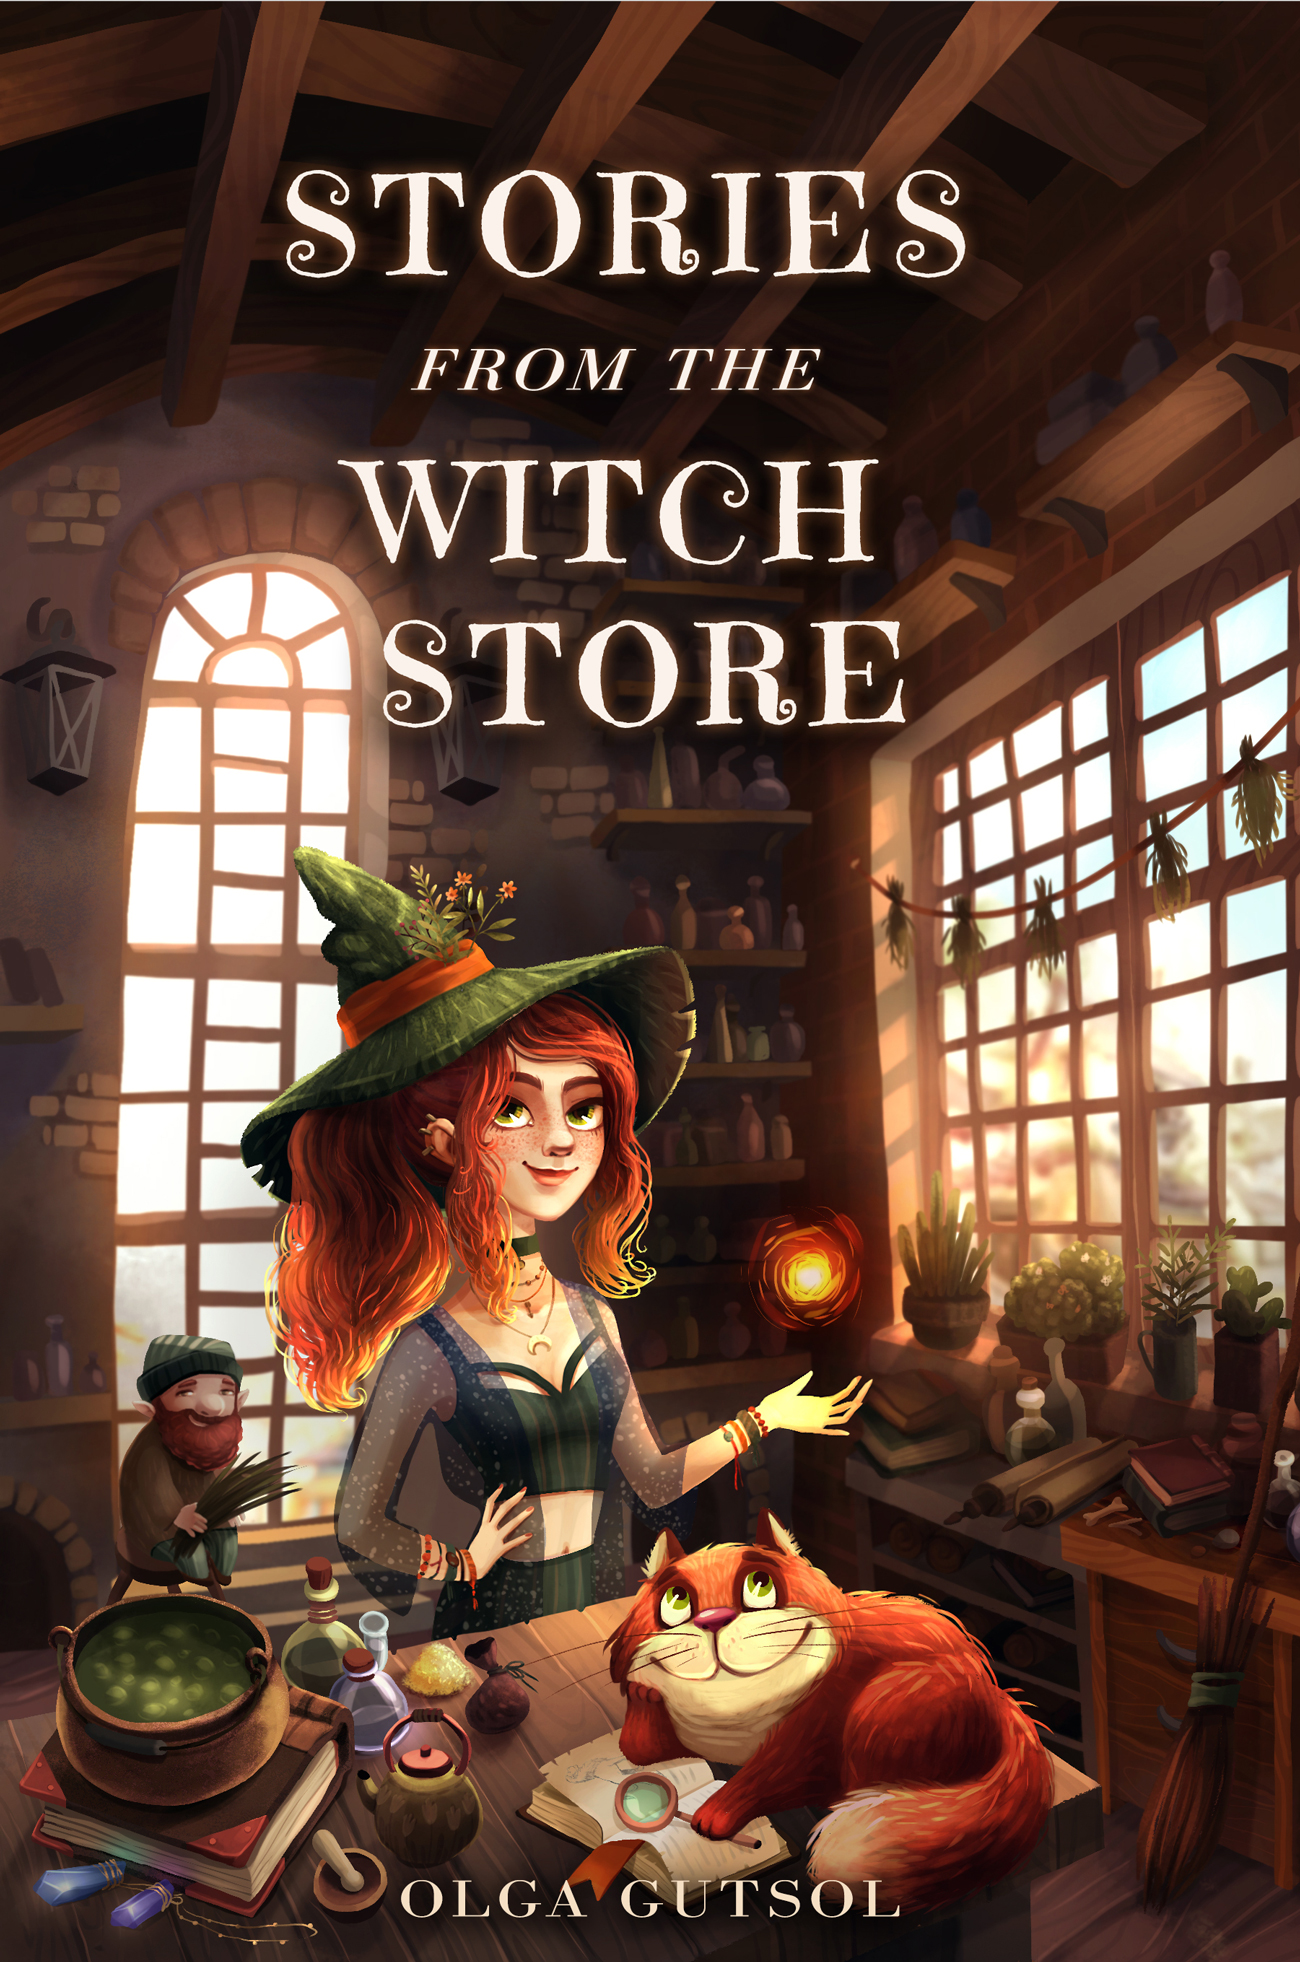 FREE: Stories from the Witch Store by Olga Gutsol